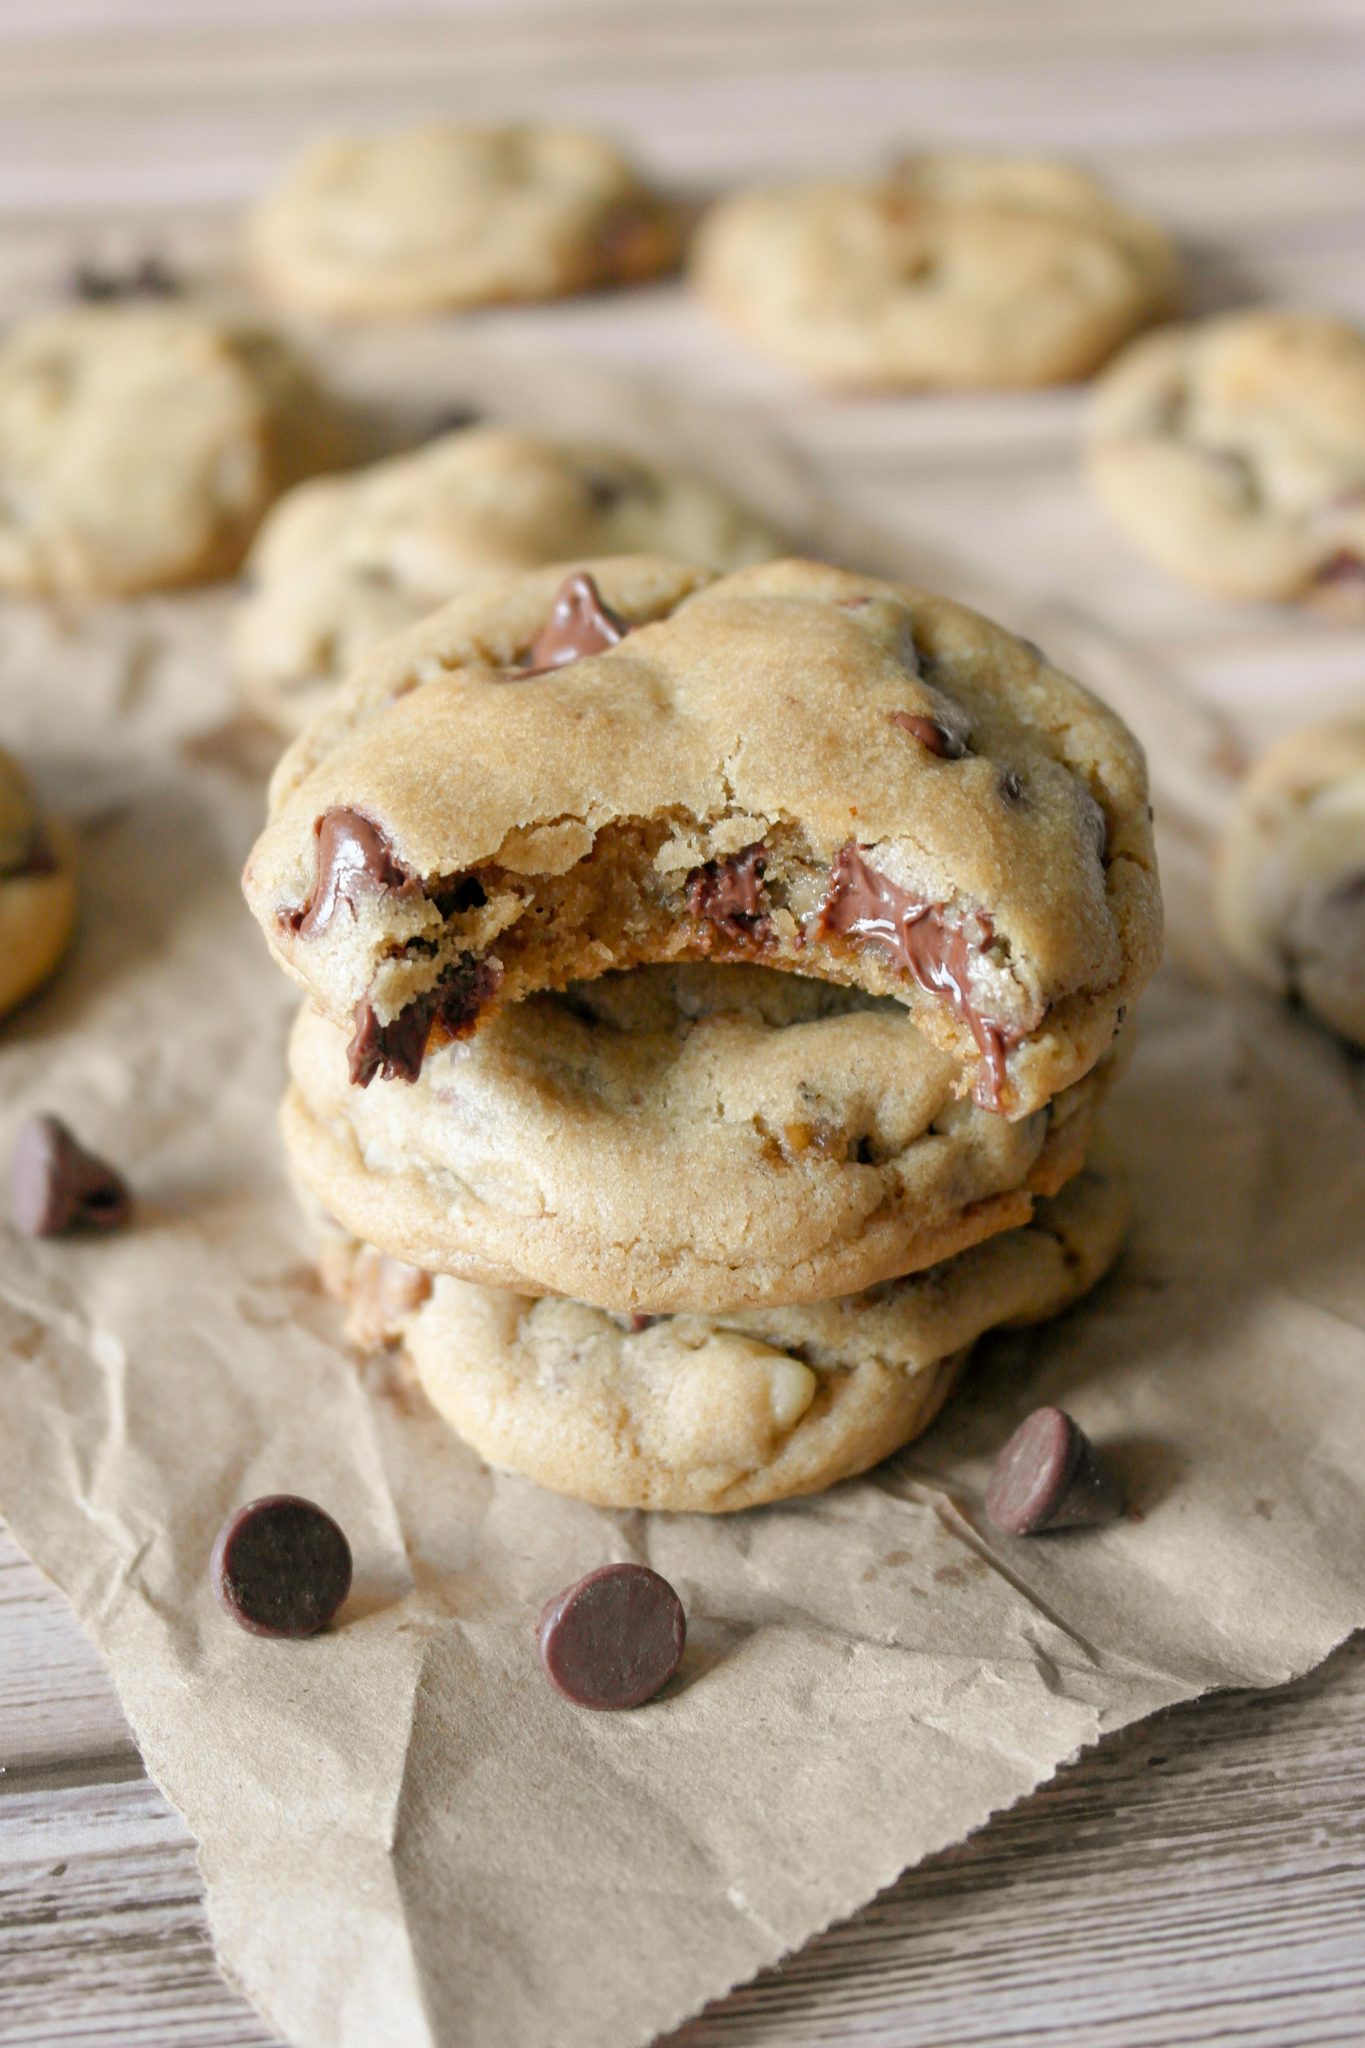 15 of the Best Chocolate Chip Cookie Recipes - The Sweetest Occasion